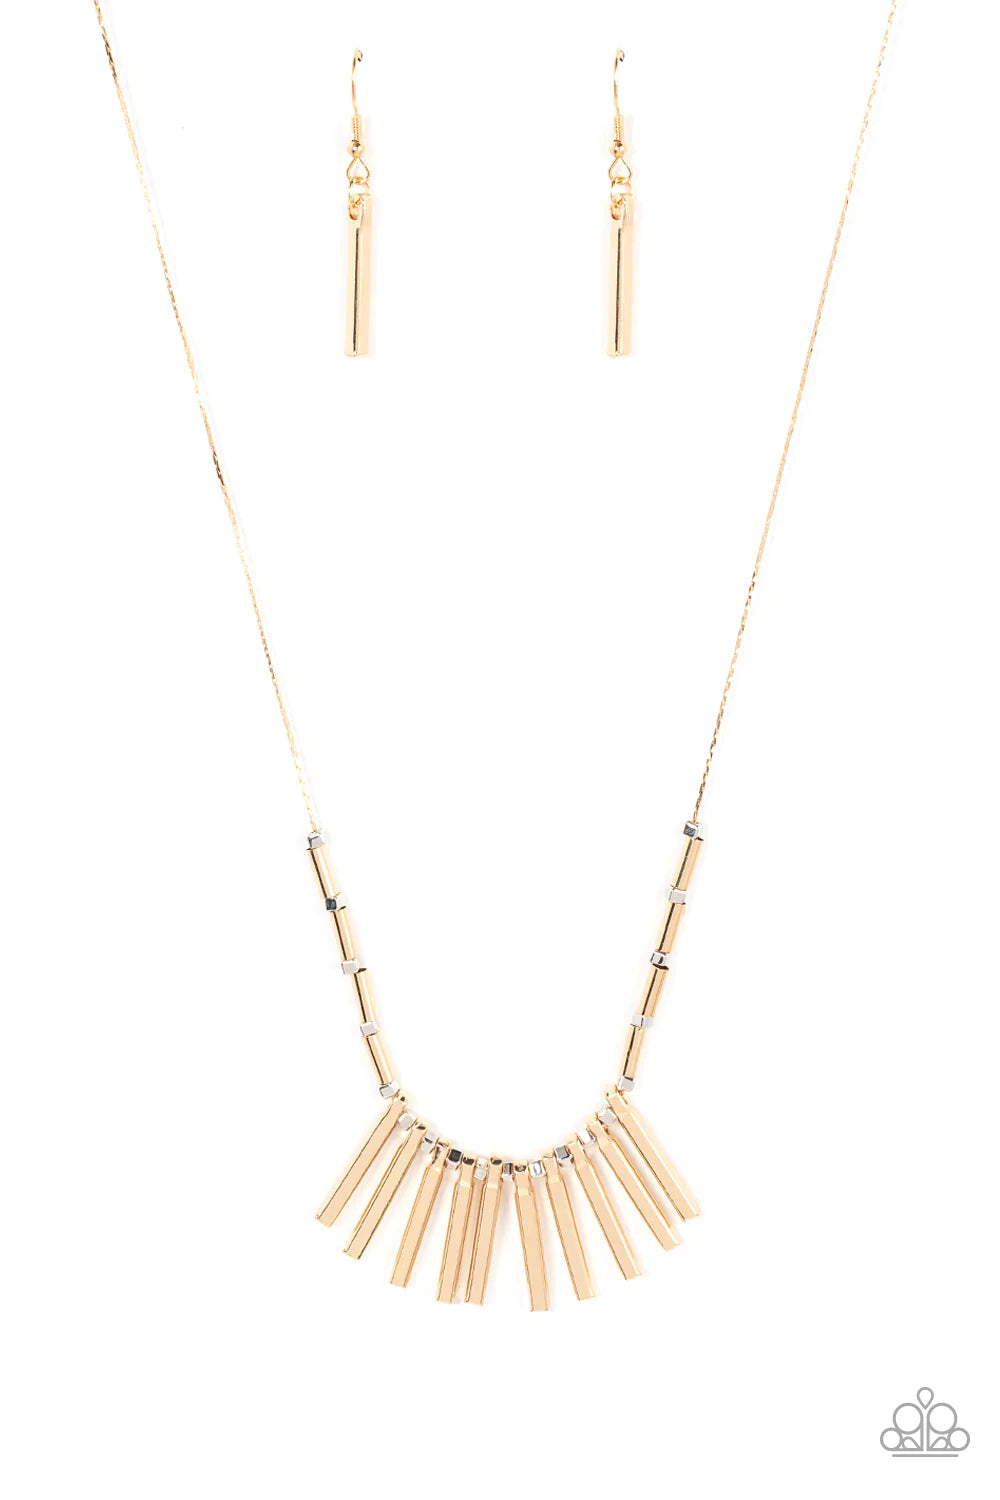 Paparazzi Accessories Rustic Hot Rod - Gold Infused with dainty silver cube and cylindrical gold beads, a fringe of gold rectangular rods alternates with silver cube beads across the chest for an edgy, mixed metallic fashion. Features an adjustable clasp